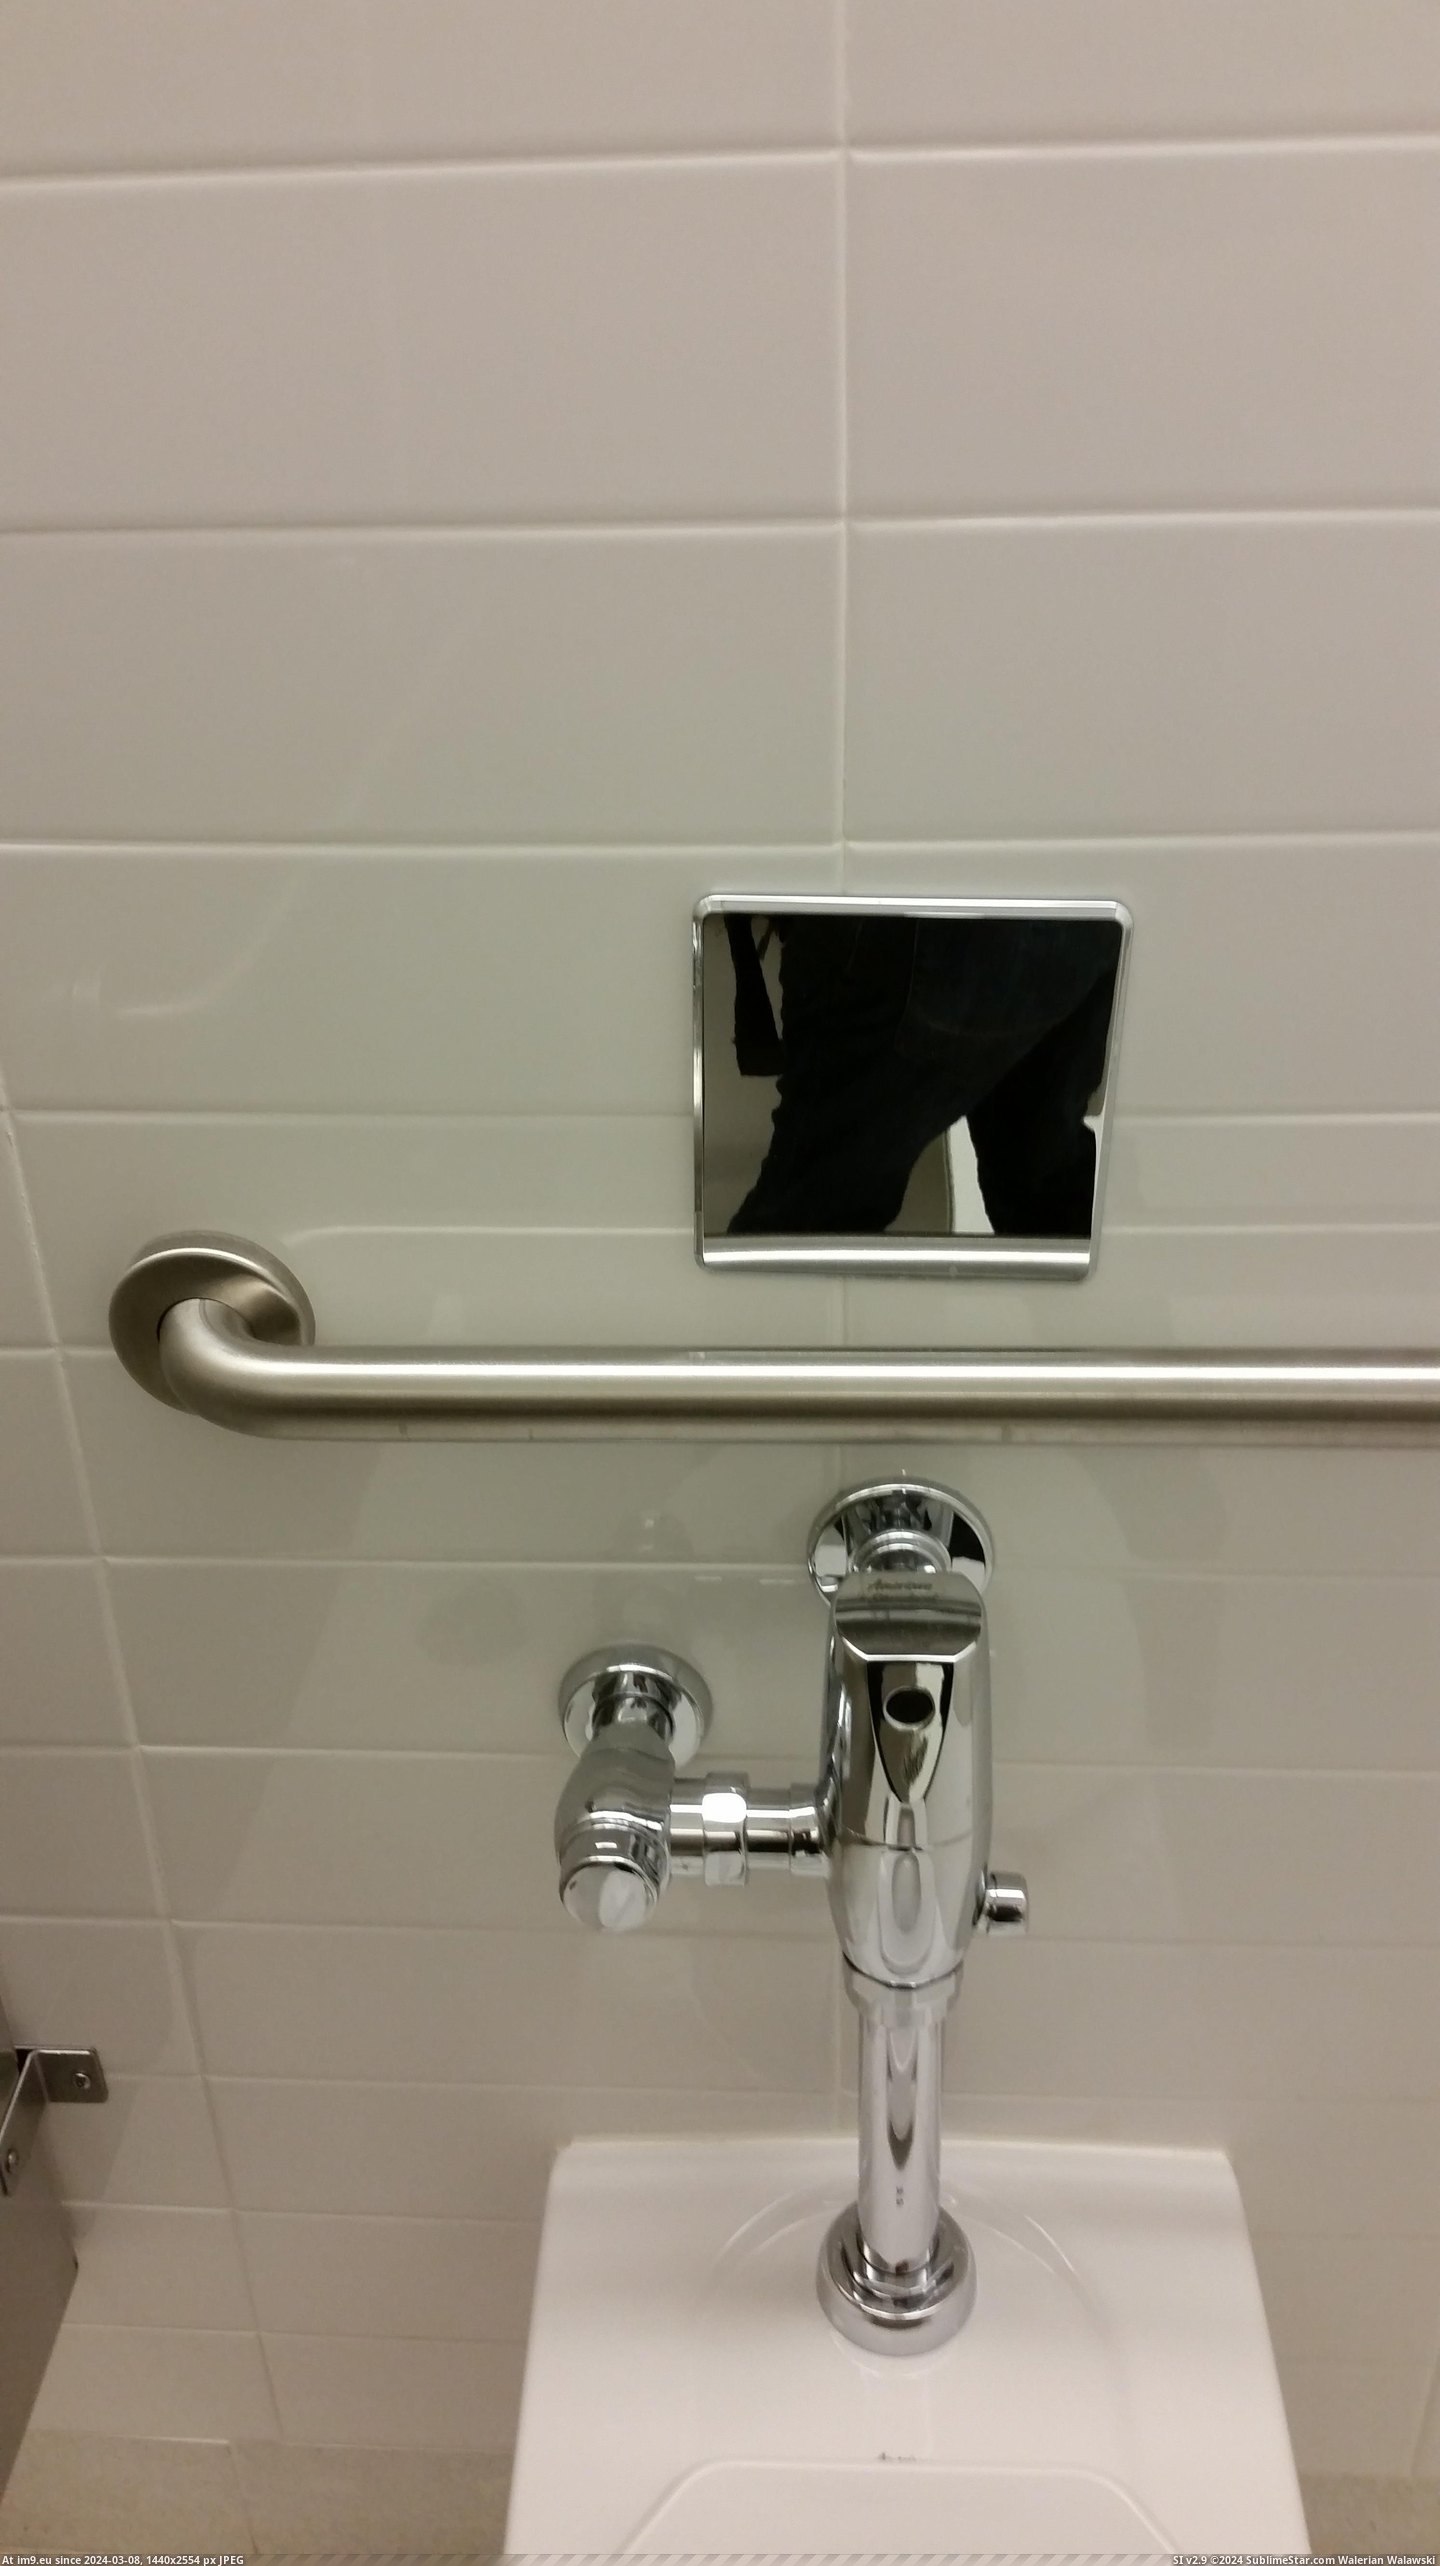 #Mirror #Tiny #Stall #Wiping #Bathroom #Check [Mildlyinteresting] This bathroom stall has a tiny mirror so you can check yourself after wiping. Pic. (Image of album My r/MILDLYINTERESTING favs))